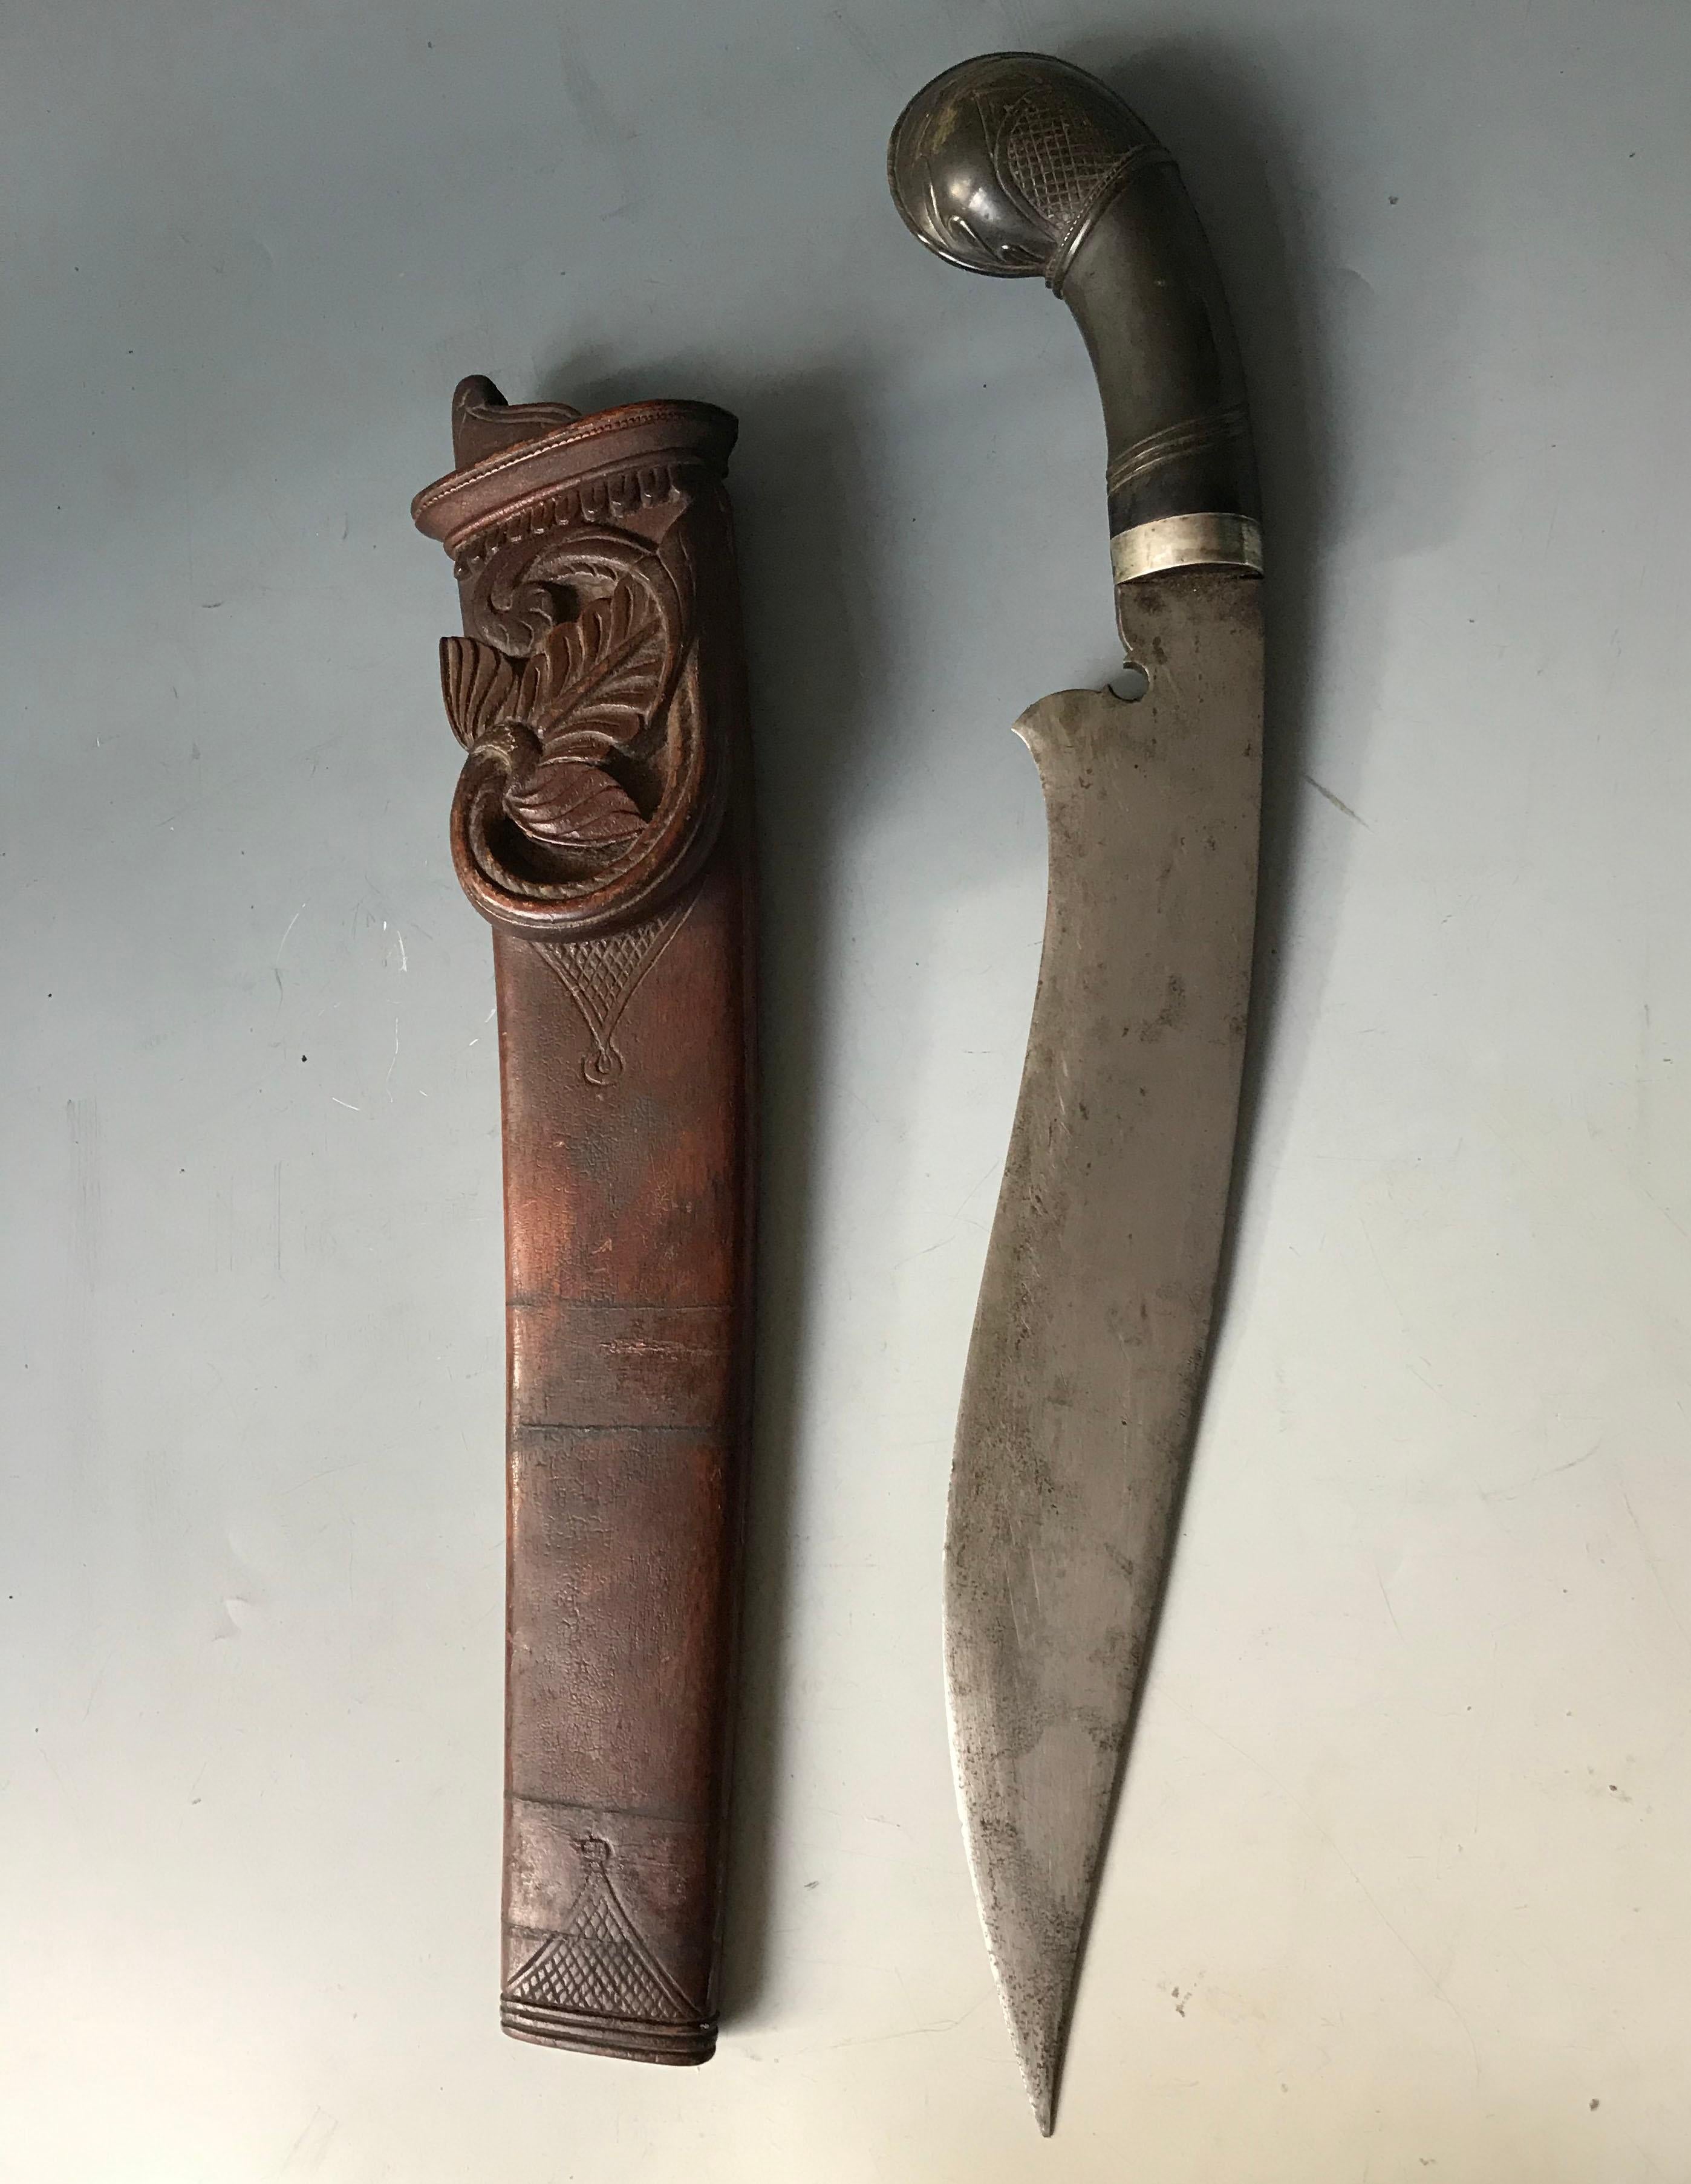 Ethnographic collectible weapons
A very fine Indonesian Or Malay Parang sword /dagger with fine quality shaped blade and carved horn handle with a carved wood scabbard.
Period Early 20th century
Length 16 inches 41 cm 




